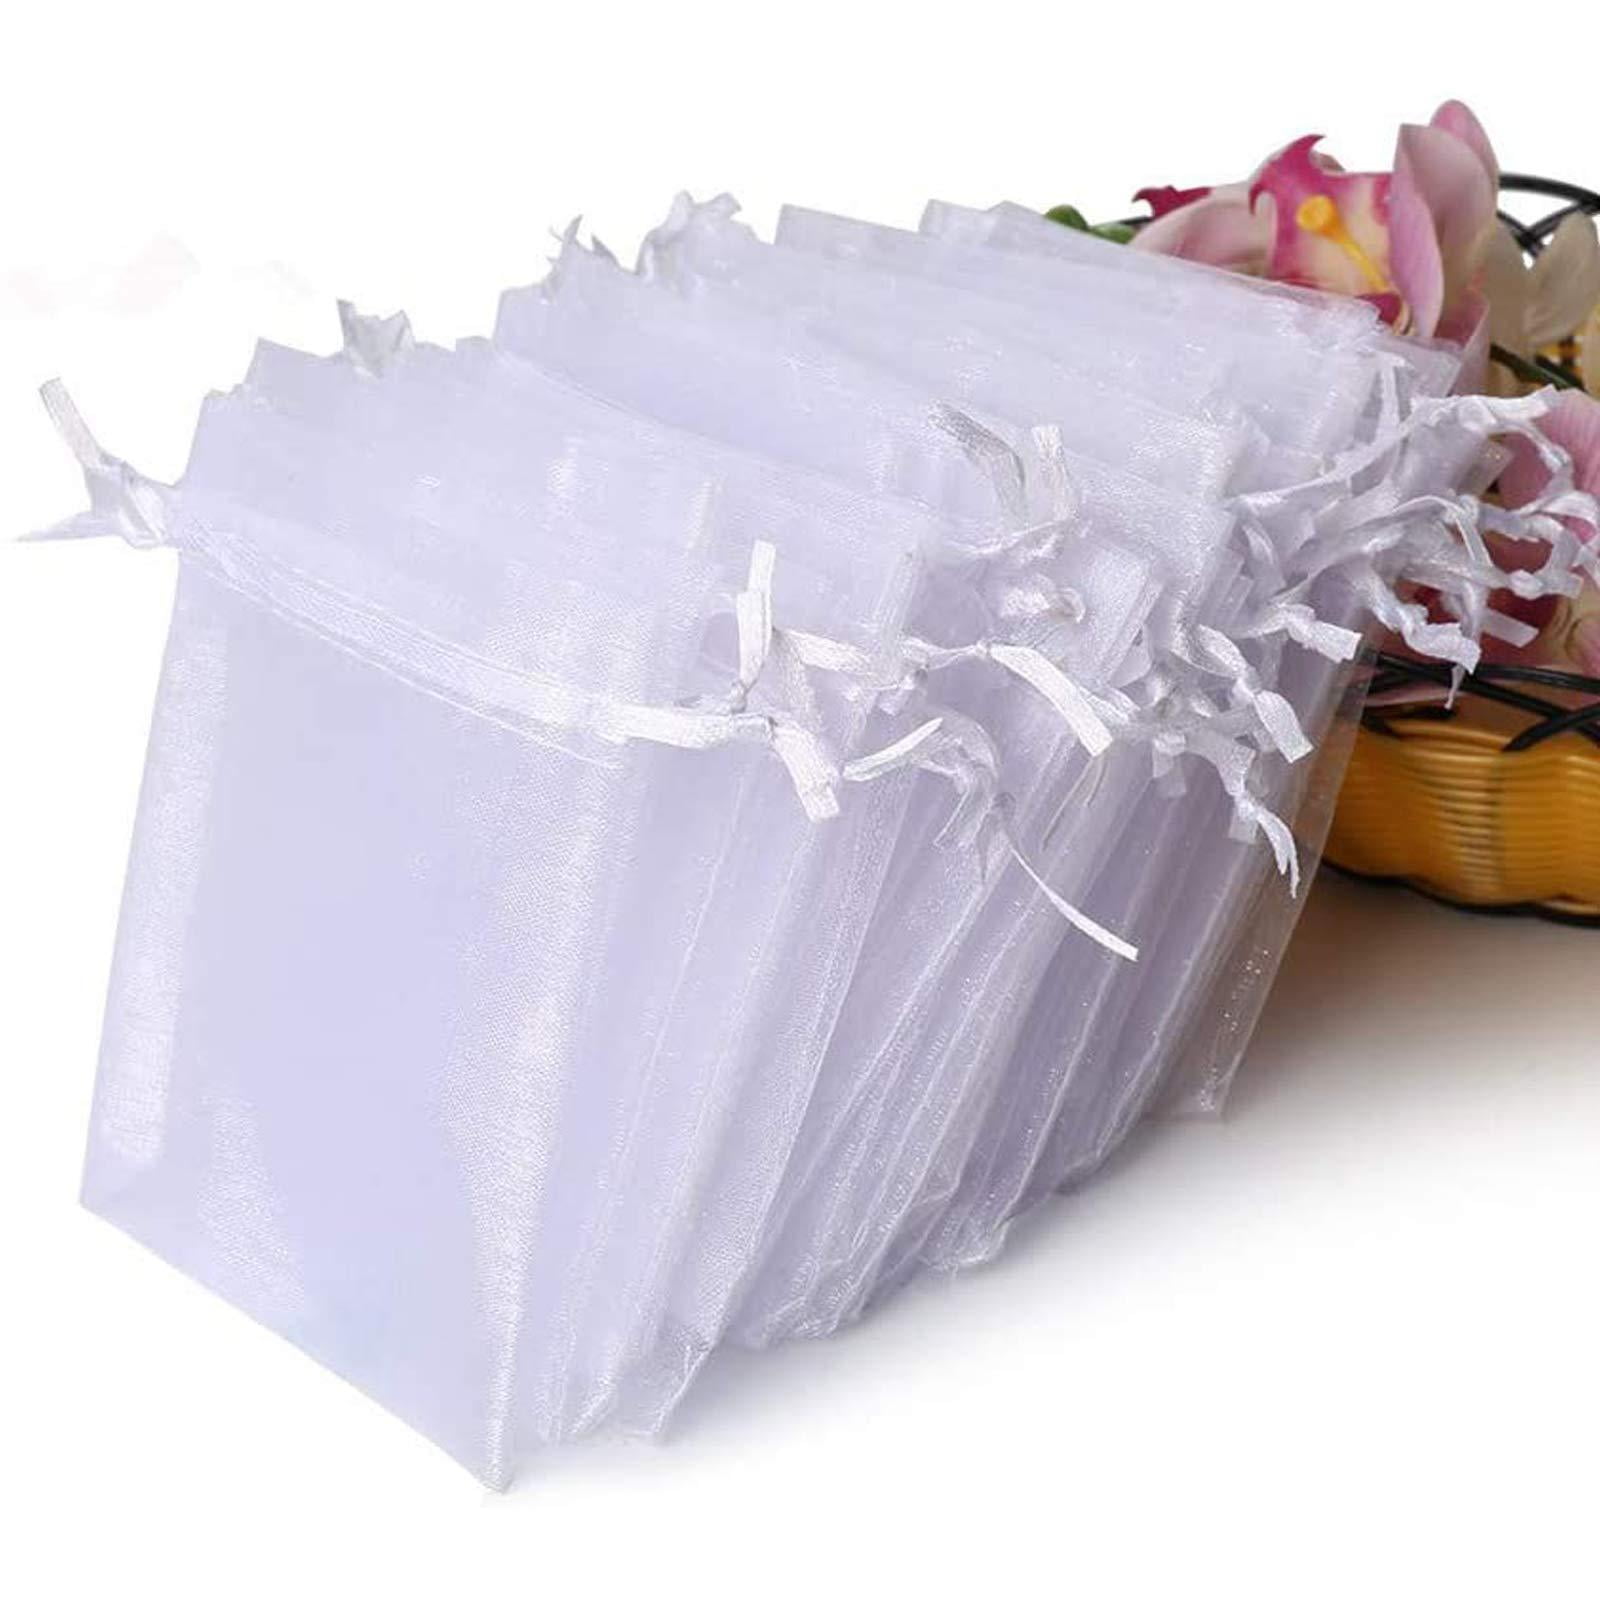 100 pieces 2" x 3" MINI Organza Bags Wedding Party Favor Gifts gold 